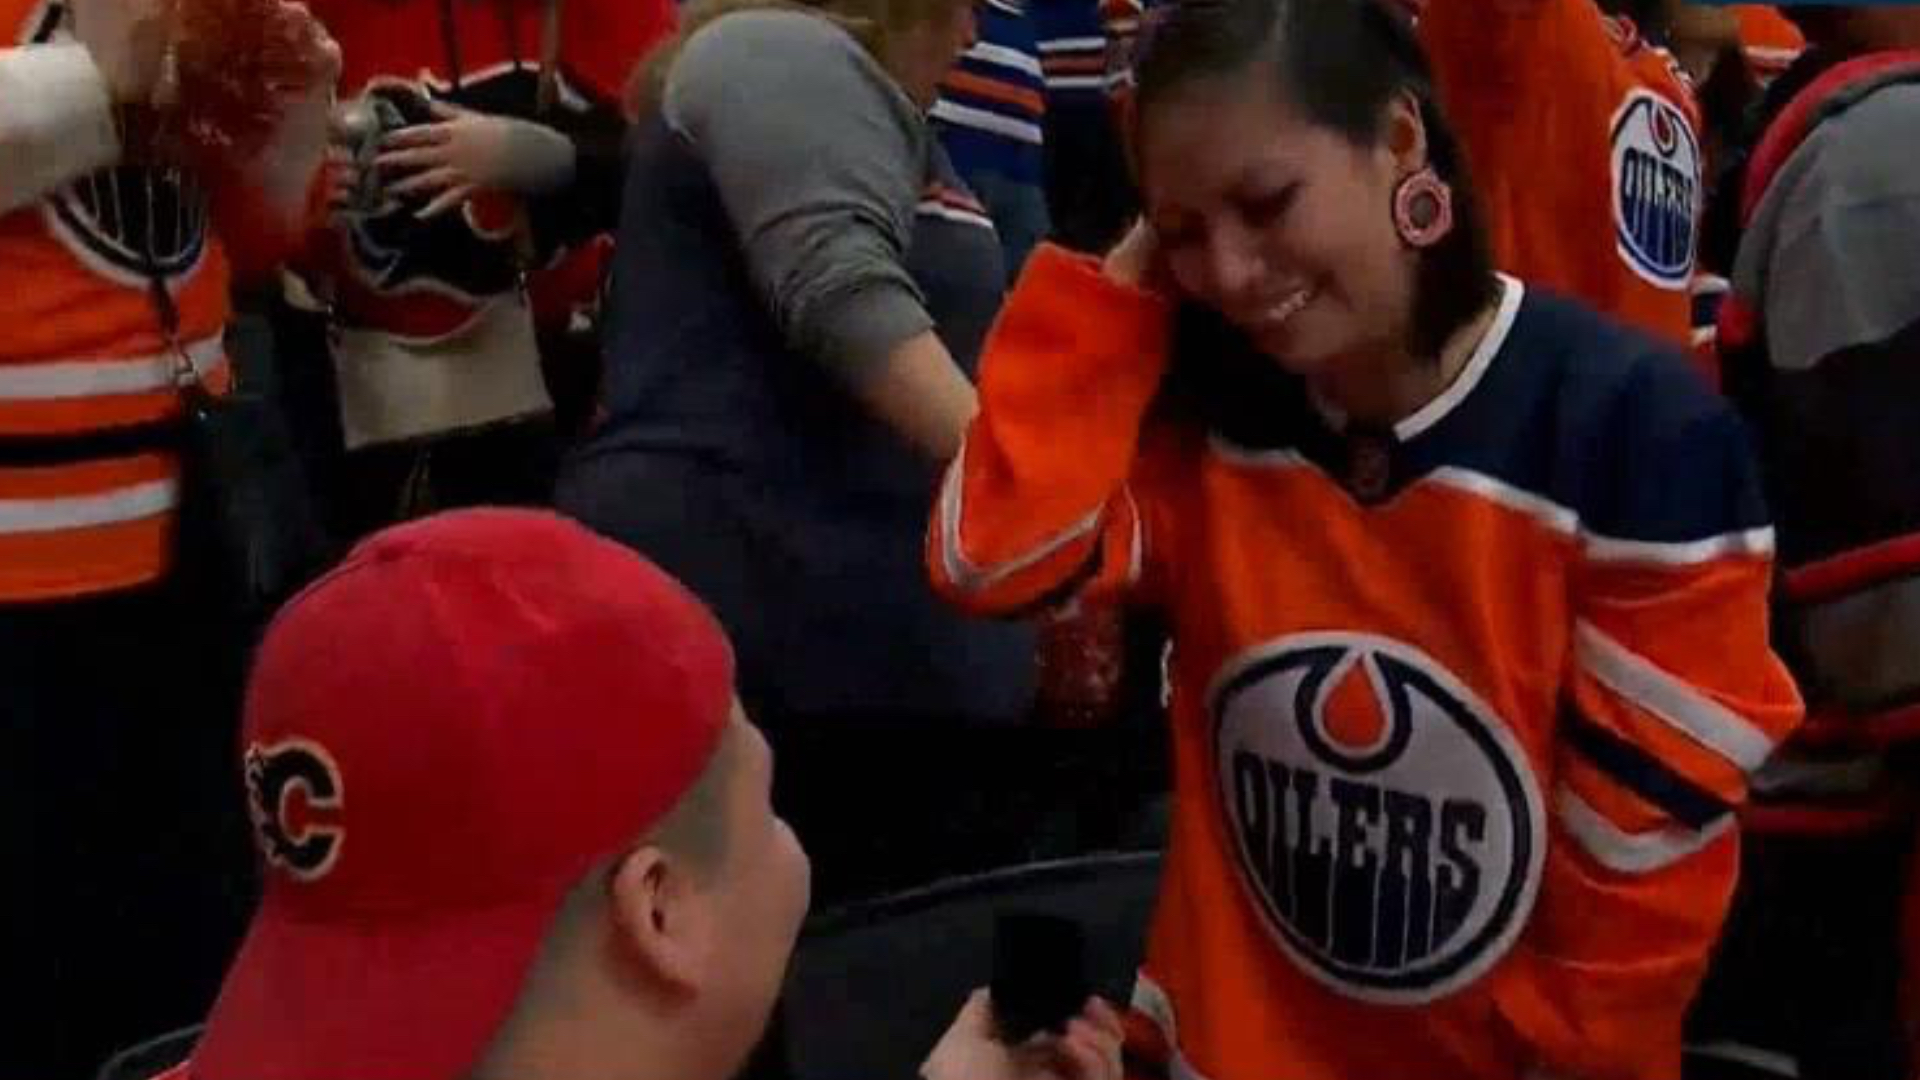 Calgary Flames fan proposes to an Edmonton Oilers fan during game